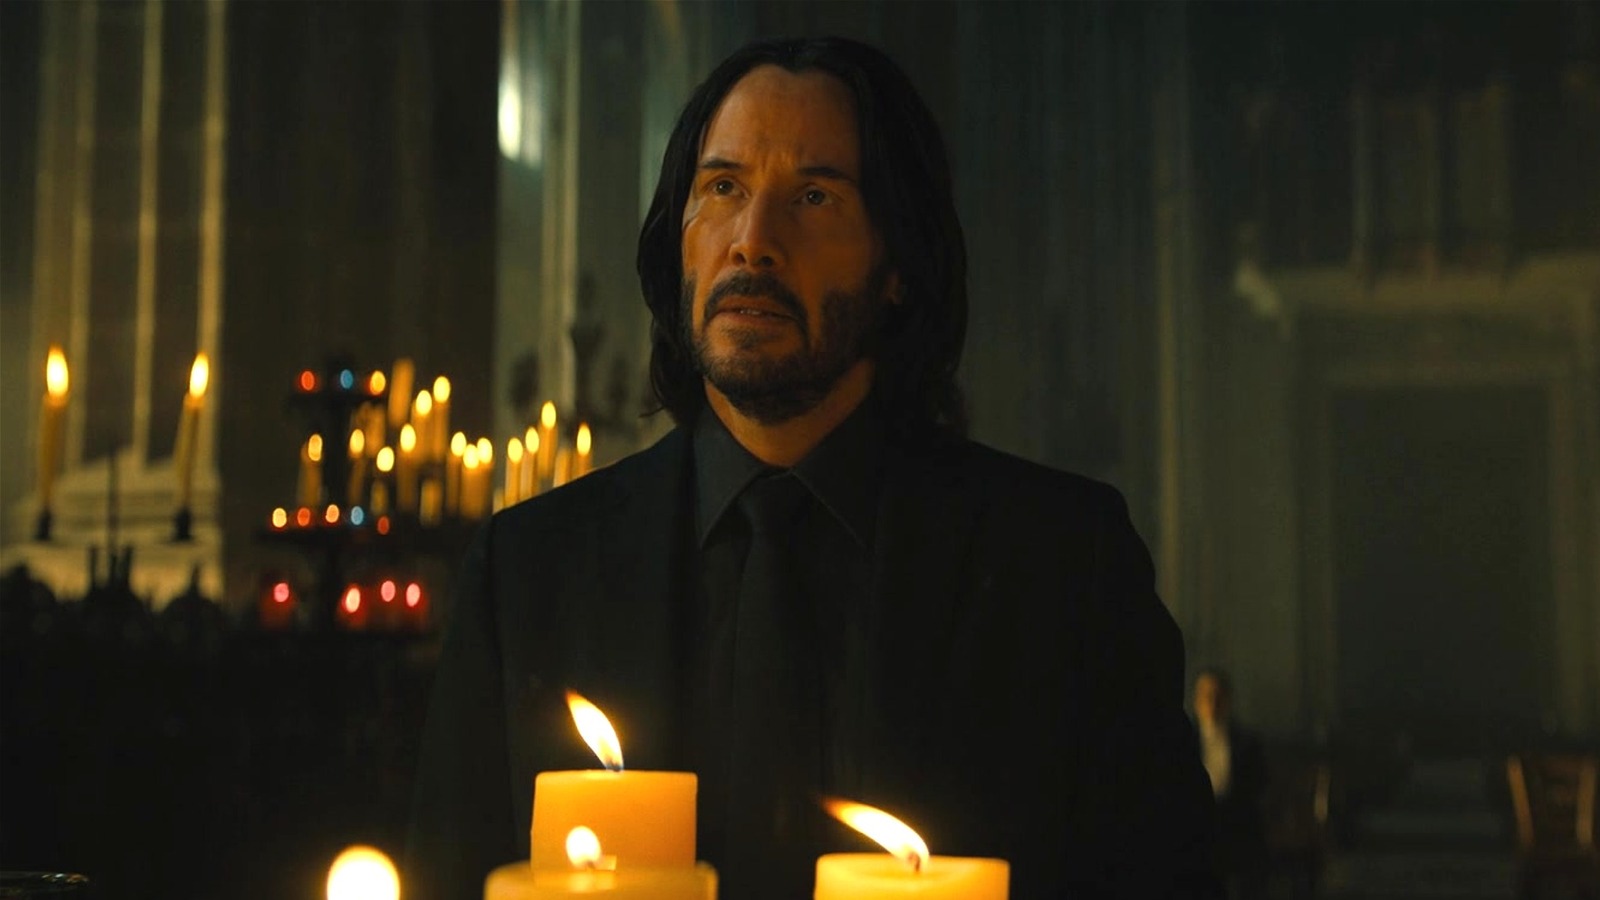 John Wick 4's first reactions have landed